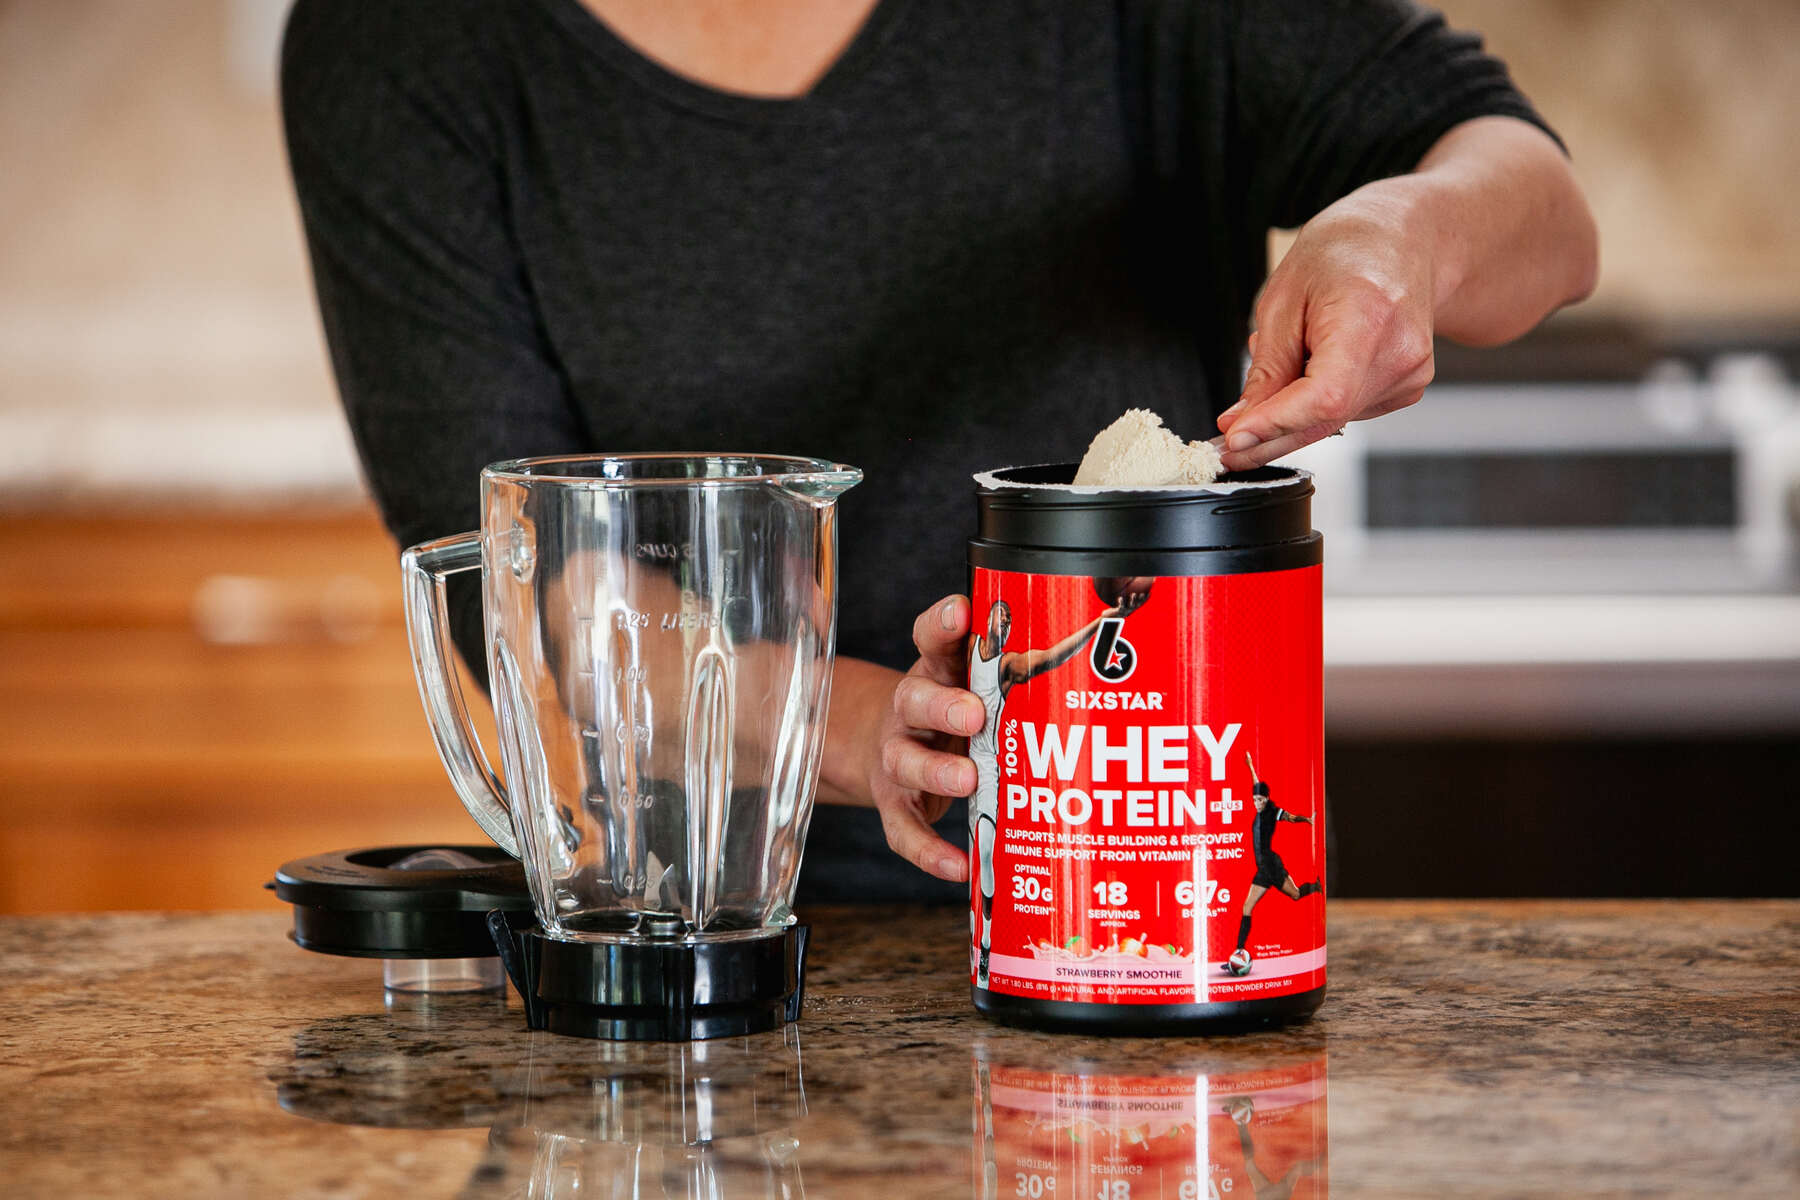 A woman scooping strawberry flavored whey protein